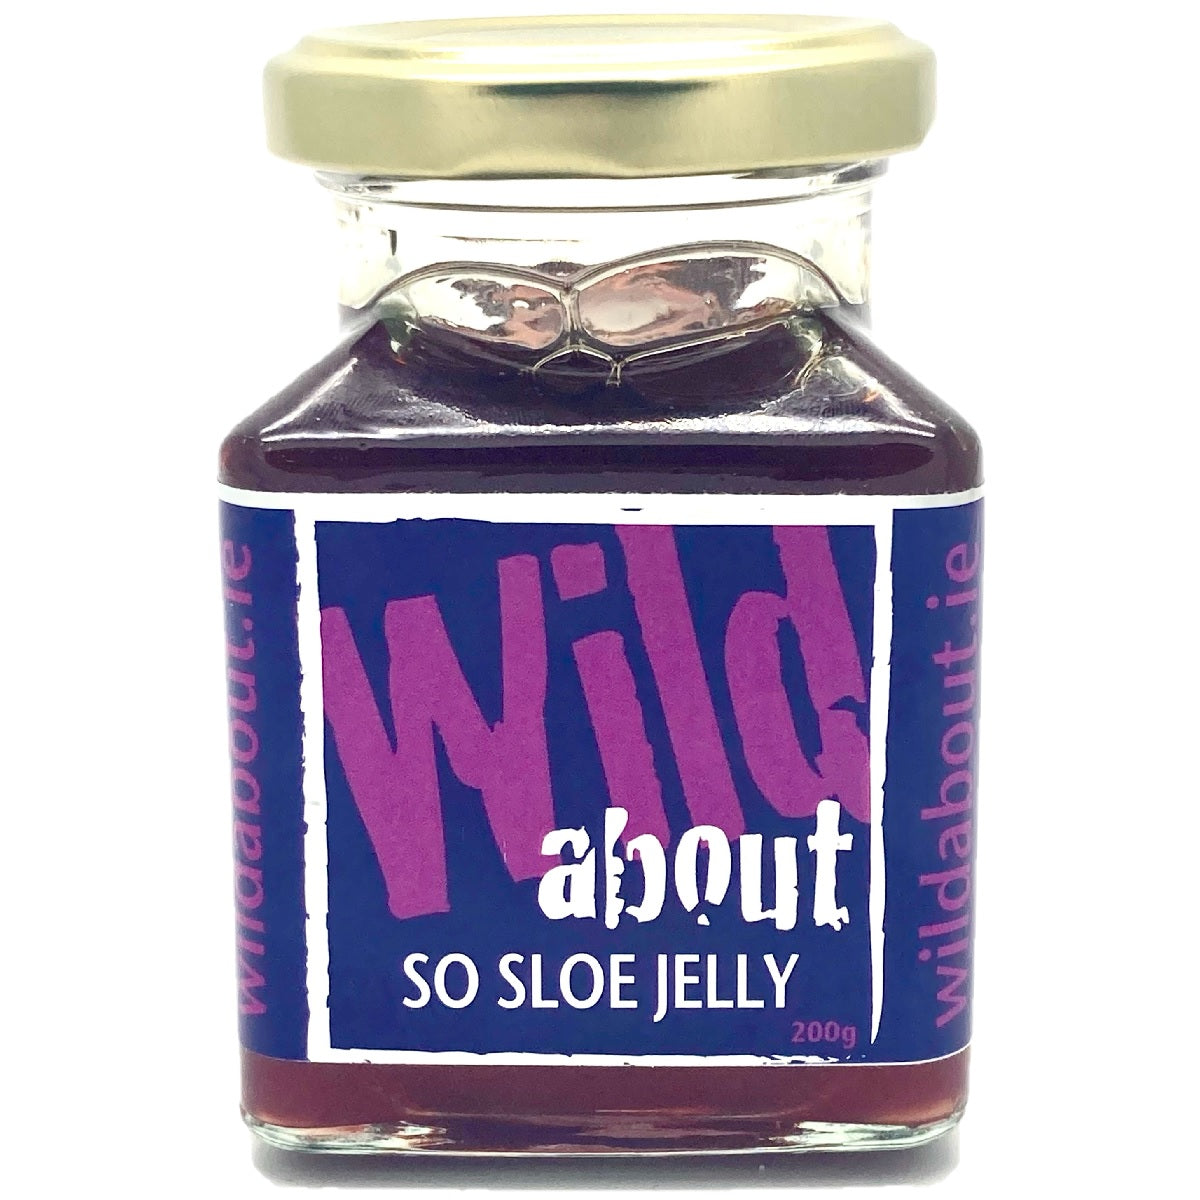 Wild About So Sloe Jelly 200g